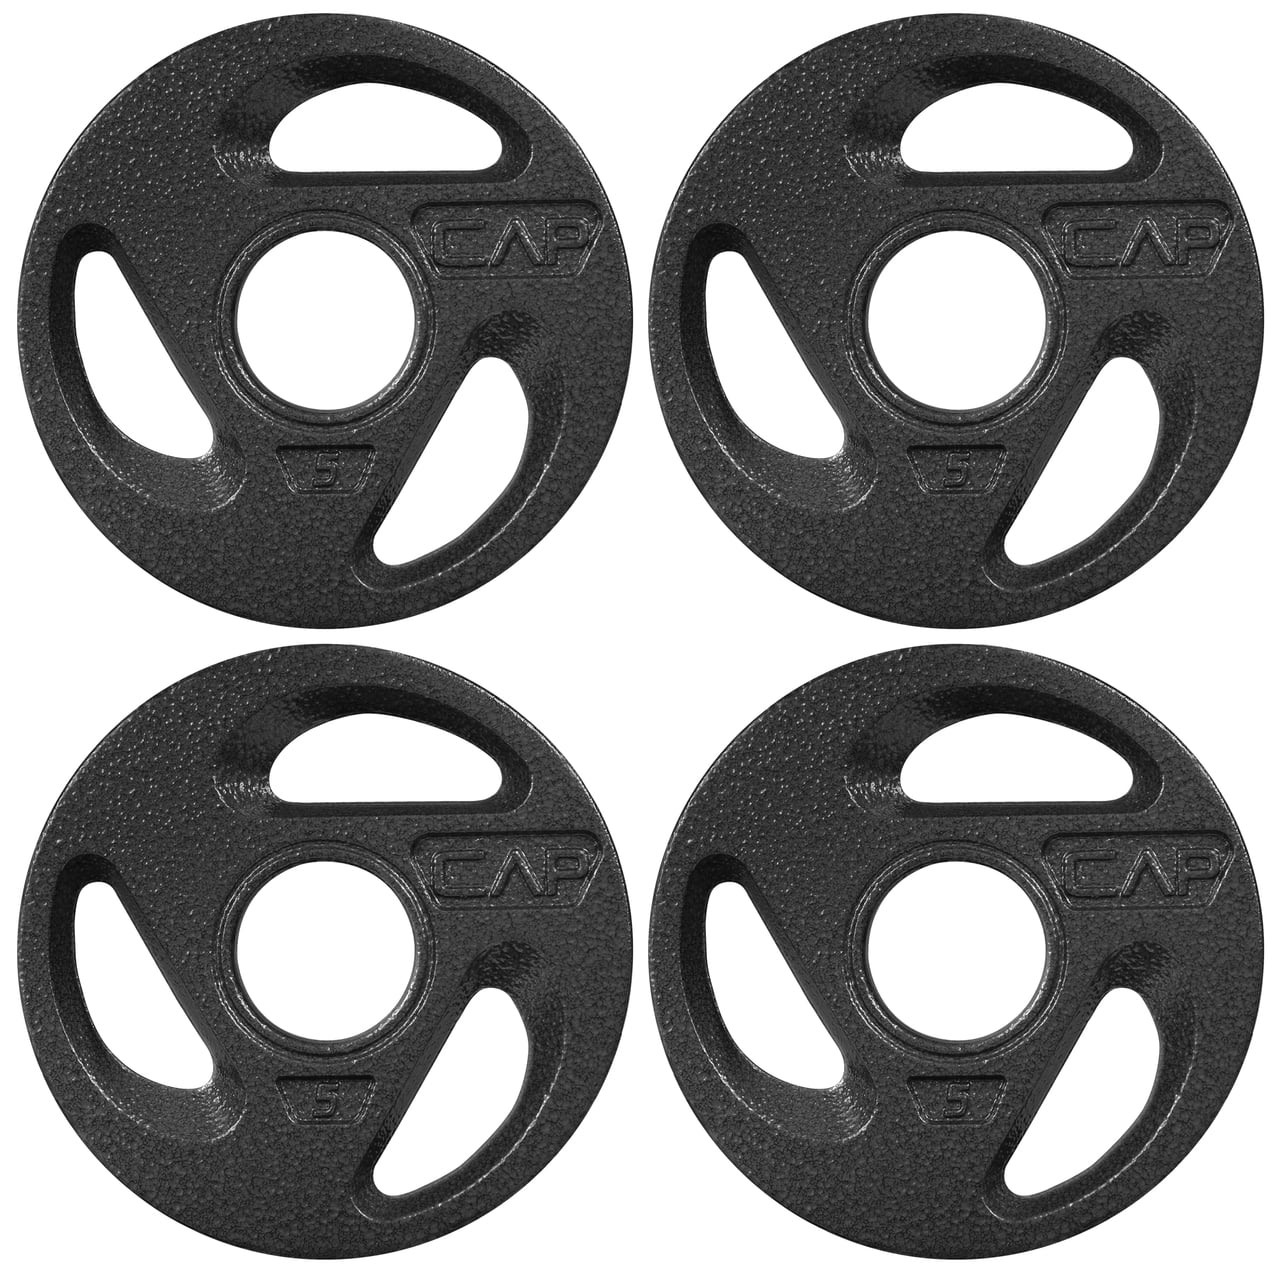 5 Available in 2.5 2-inch Diameter Collar Opening for Compatibility on any Olympic Barbell WF Athletic Supply Olympic Grip Plate 10 25 & 45lb 